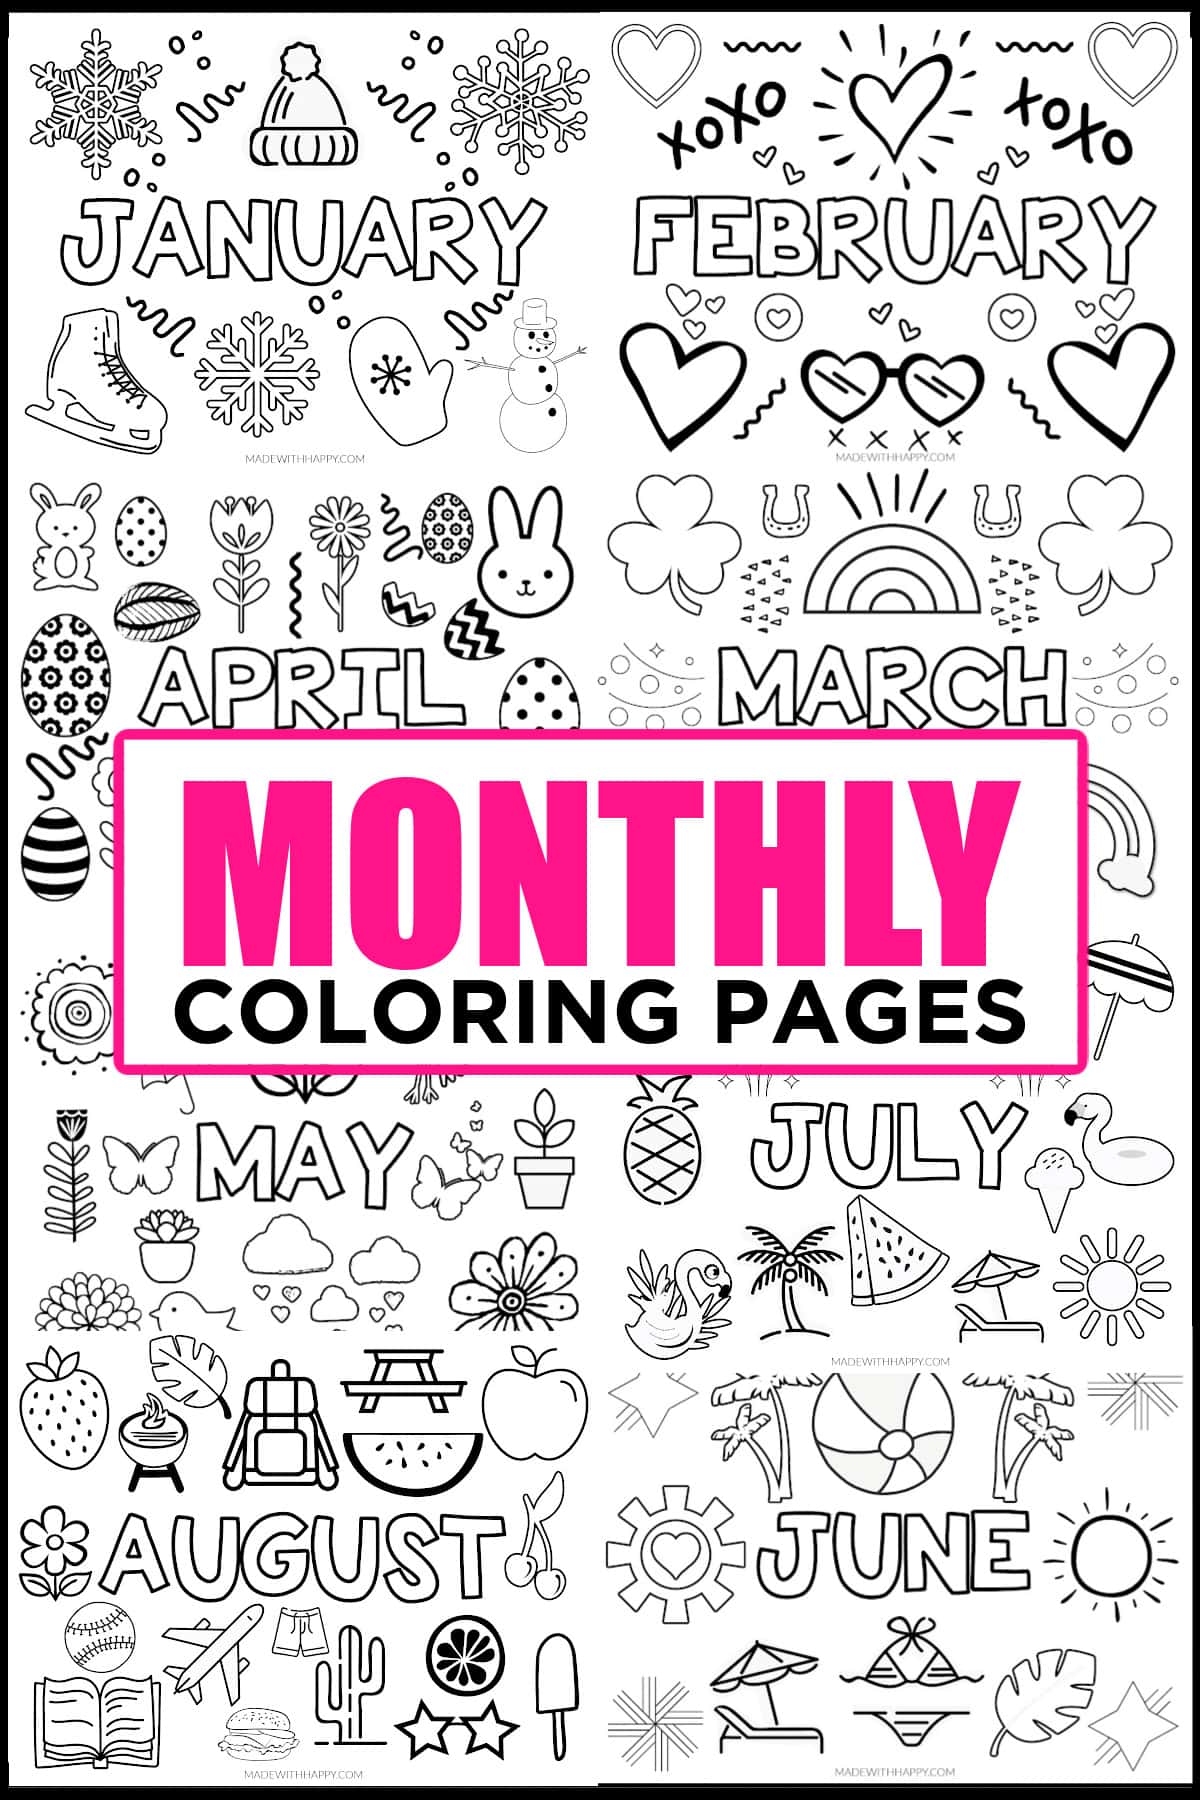 12 months of the year coloring pages